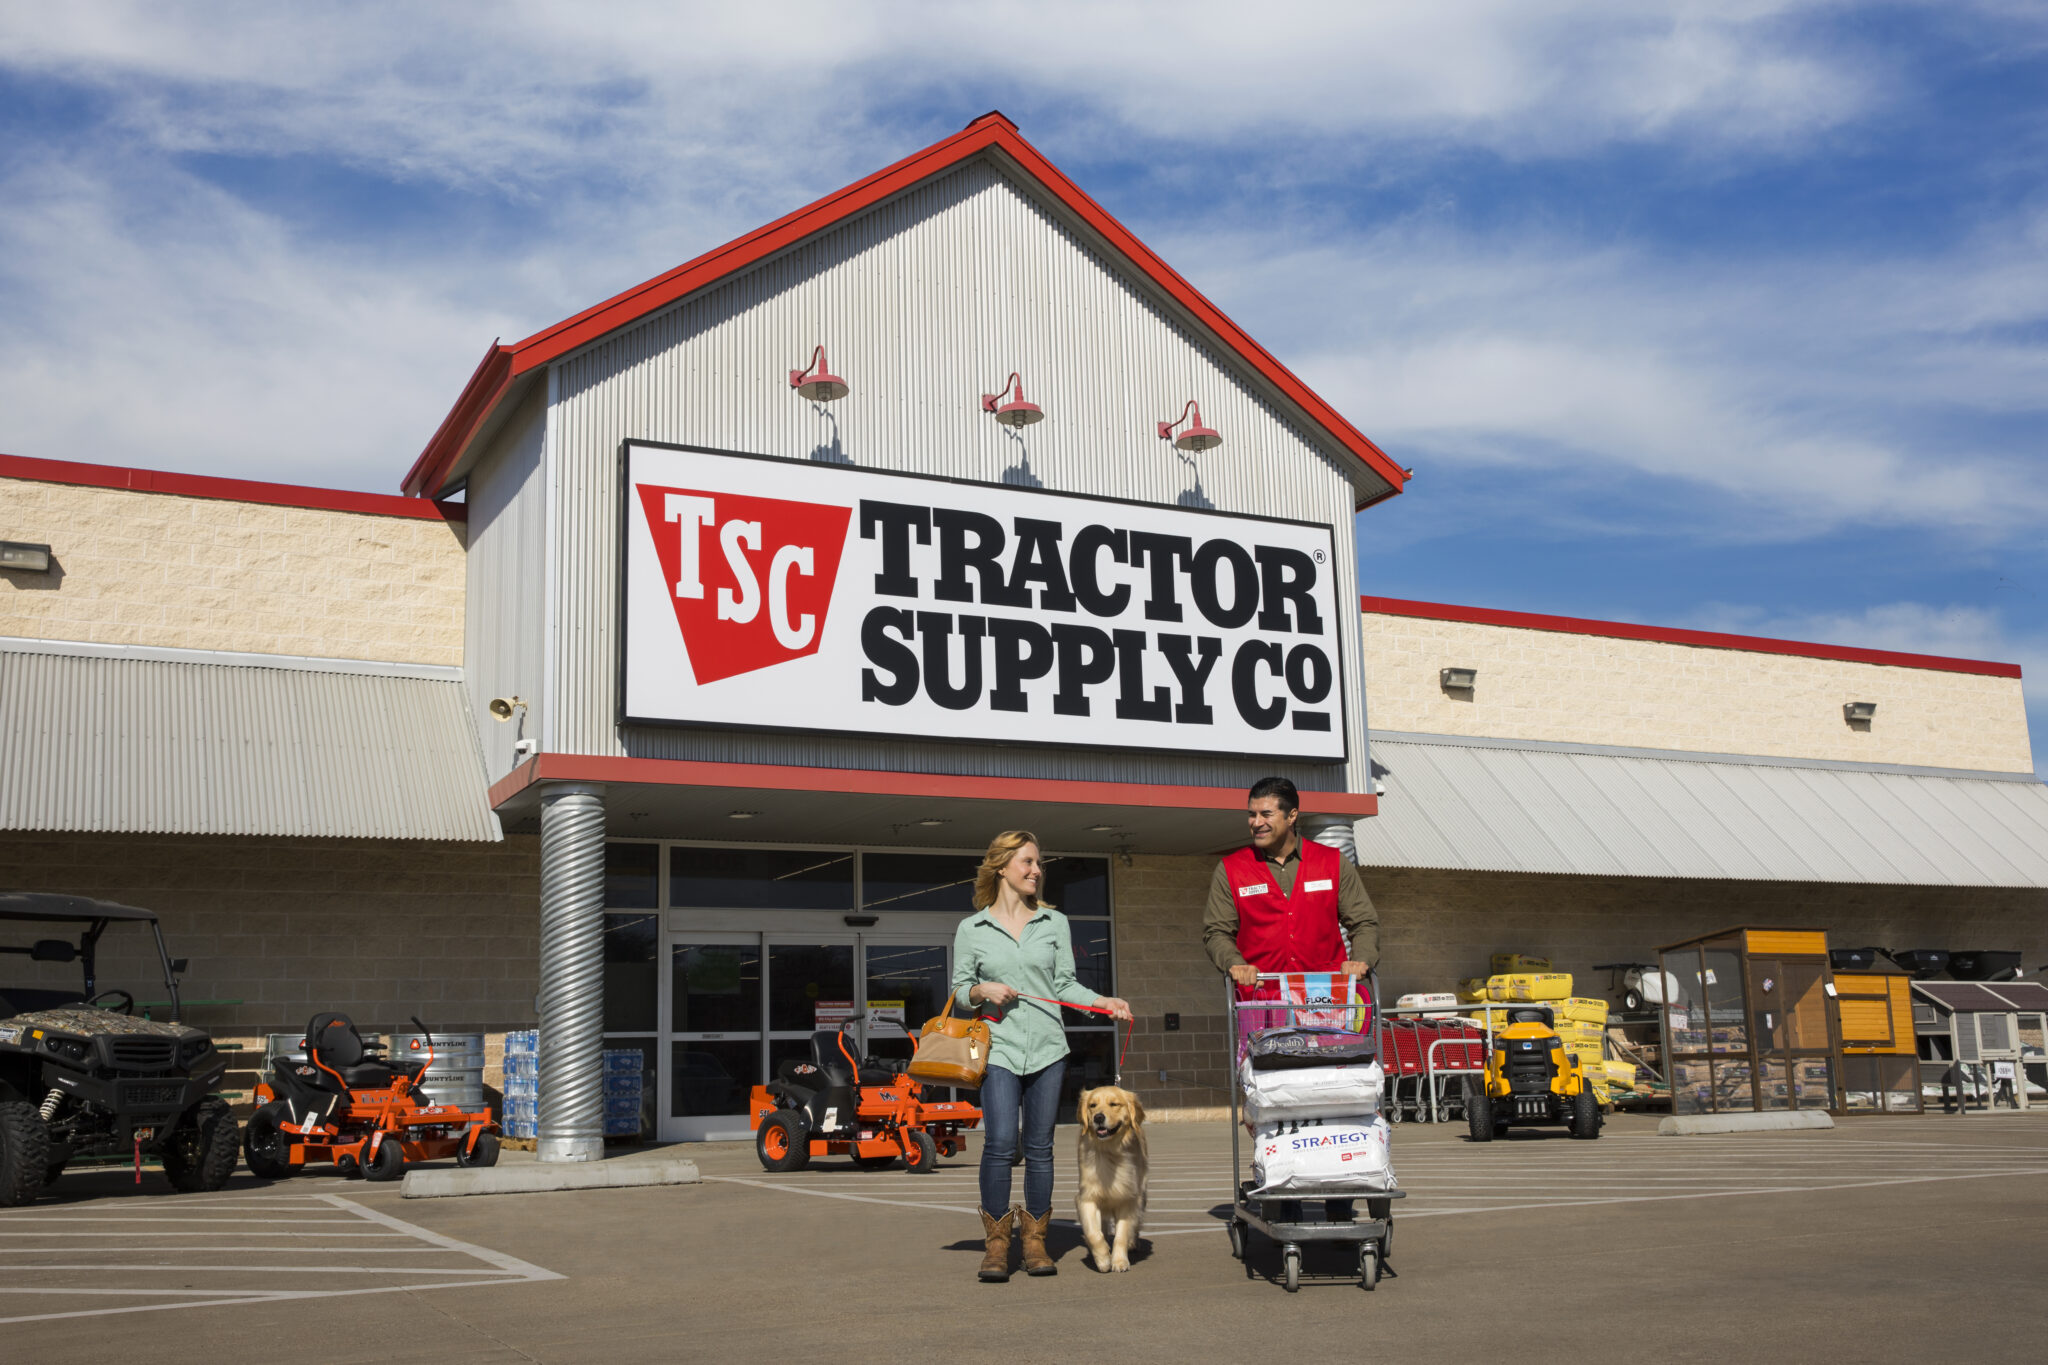 Sell to Tractor Supply Co and a Tractor Supply Vendor